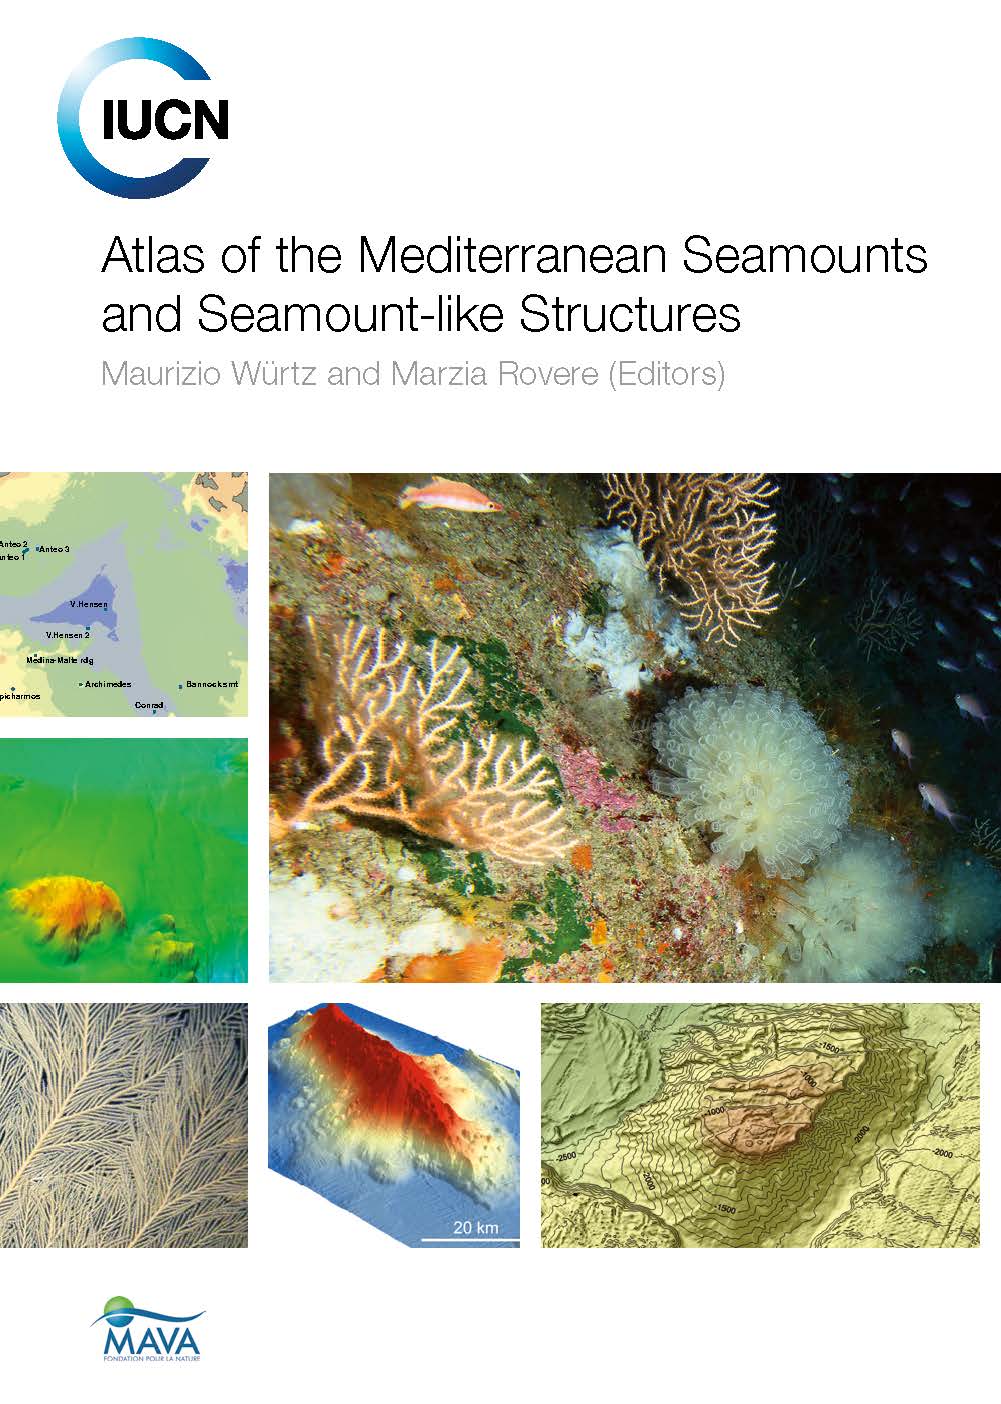 Publication: Atlas of the Mediterranean Seamounts and Seamount-like Structures